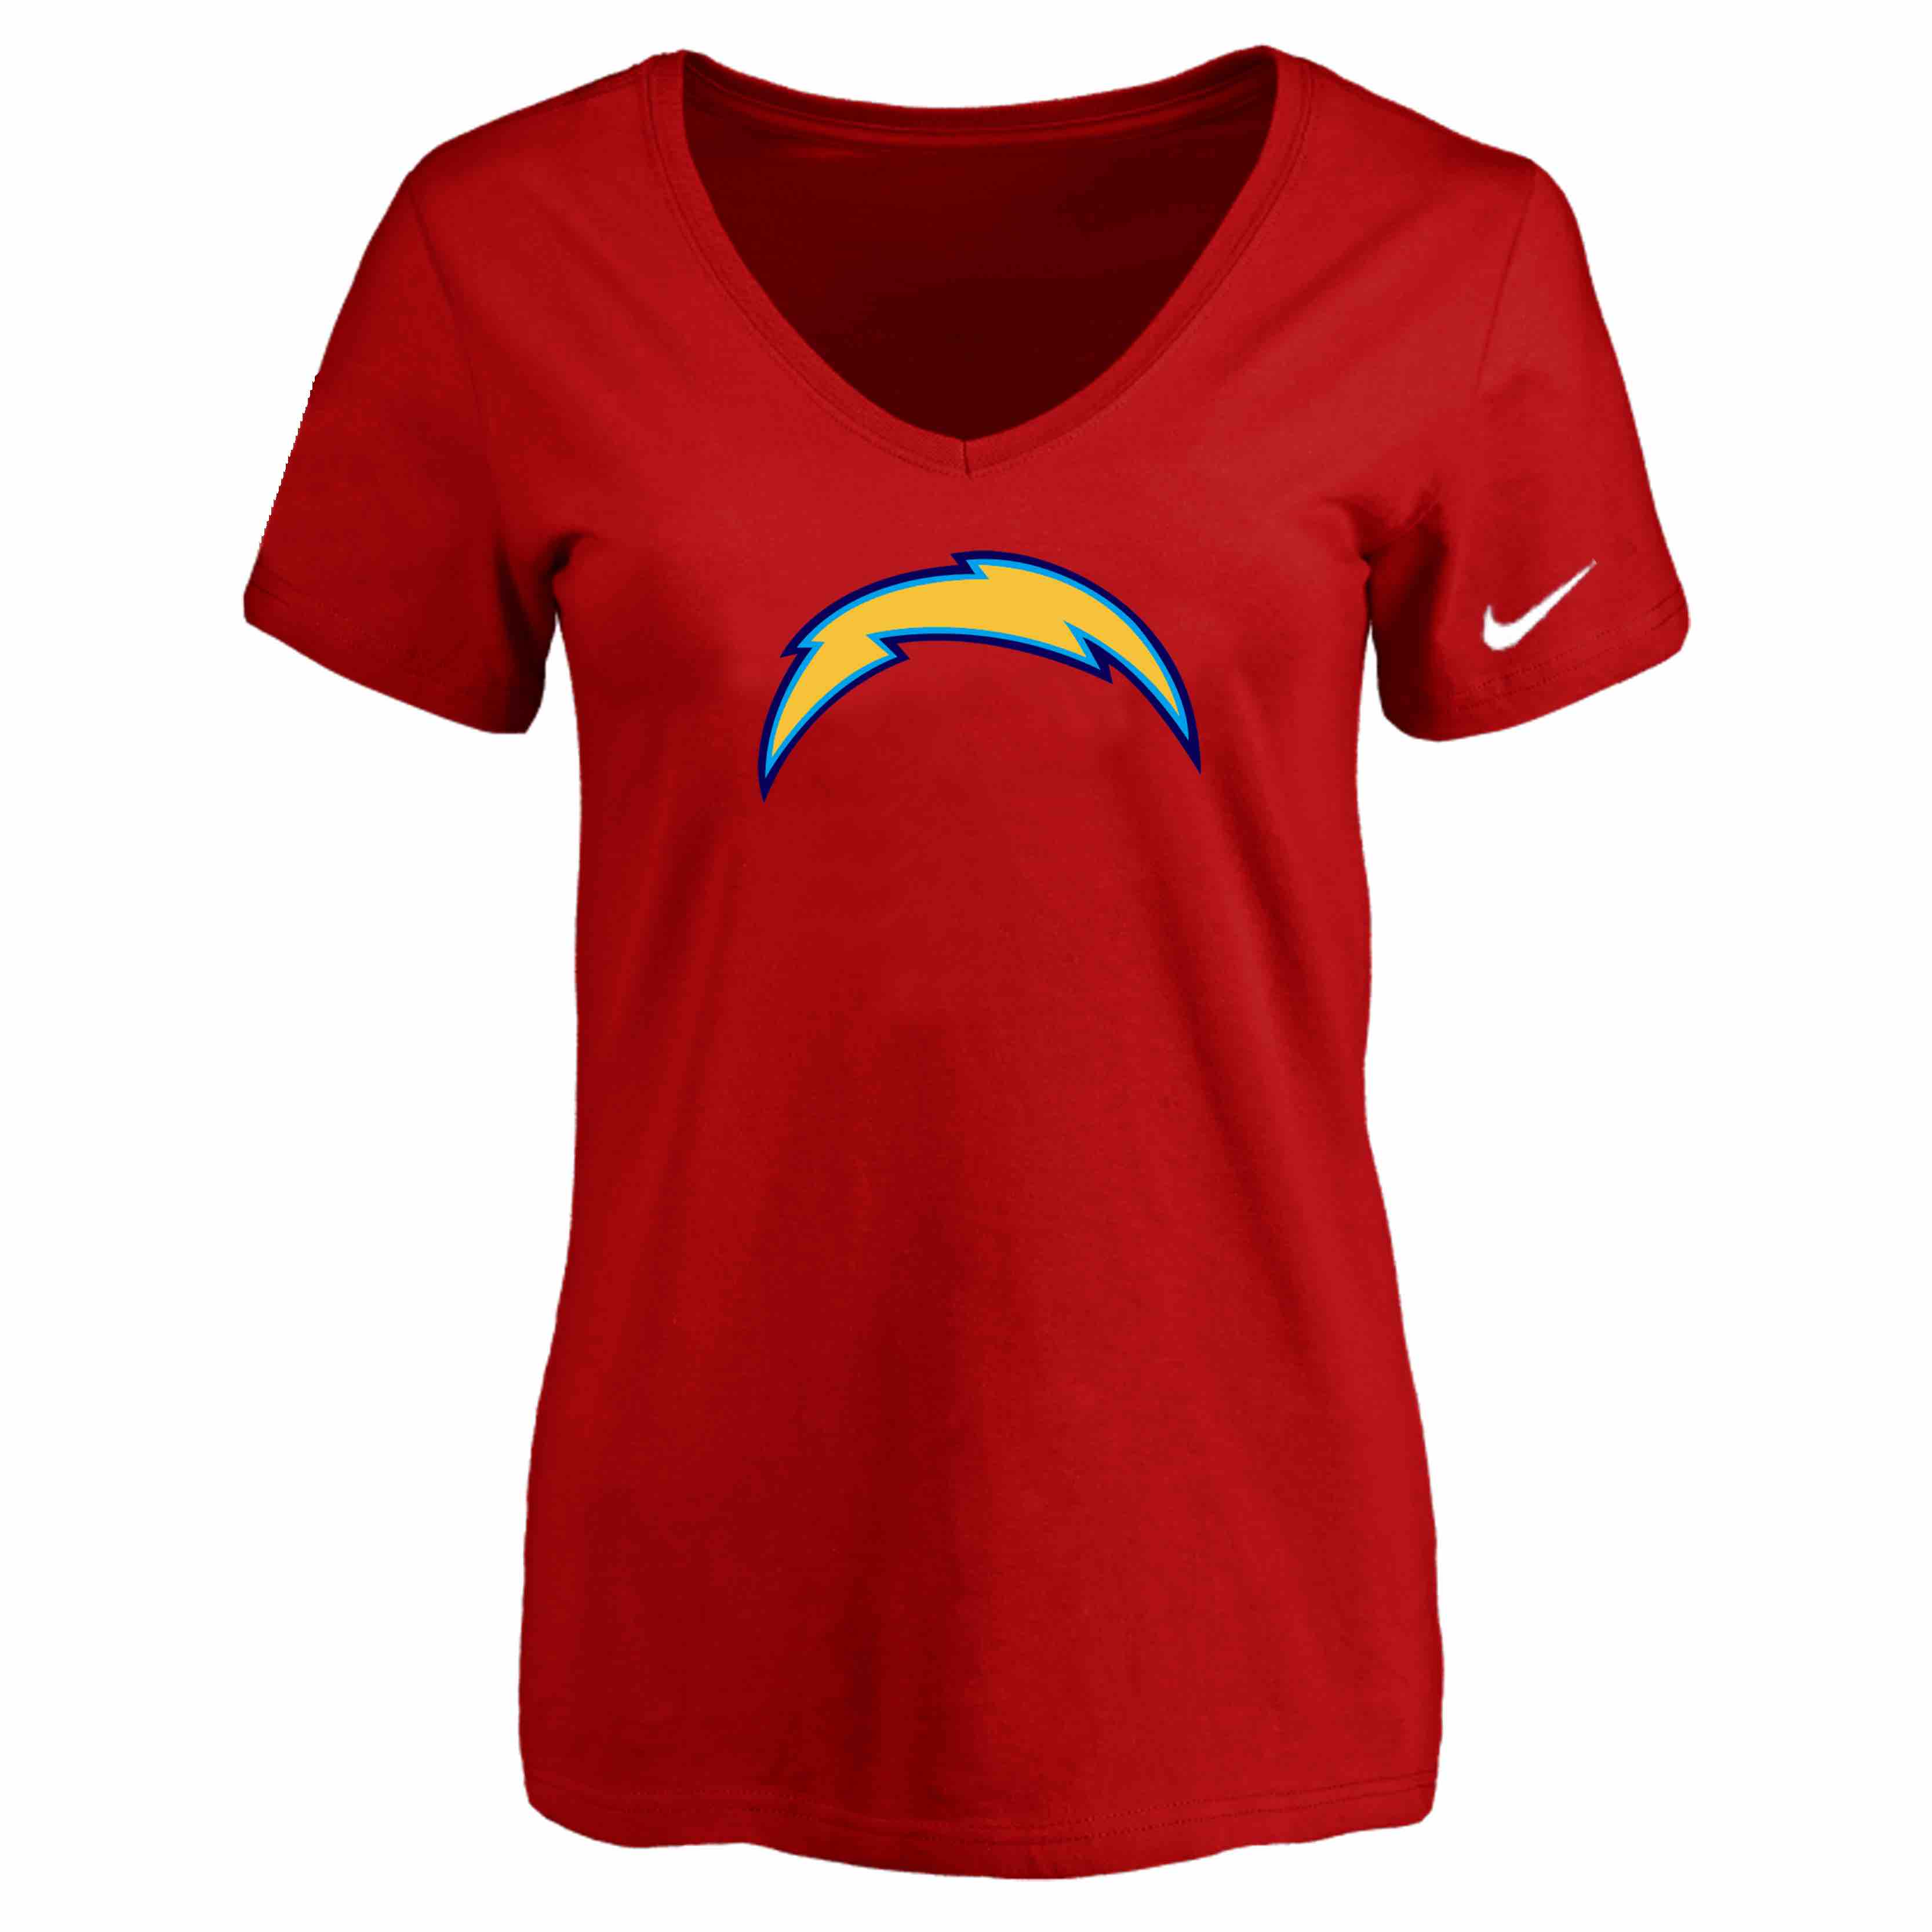 San Diego Chargers Red Womens Logo V-neck T-Shirt